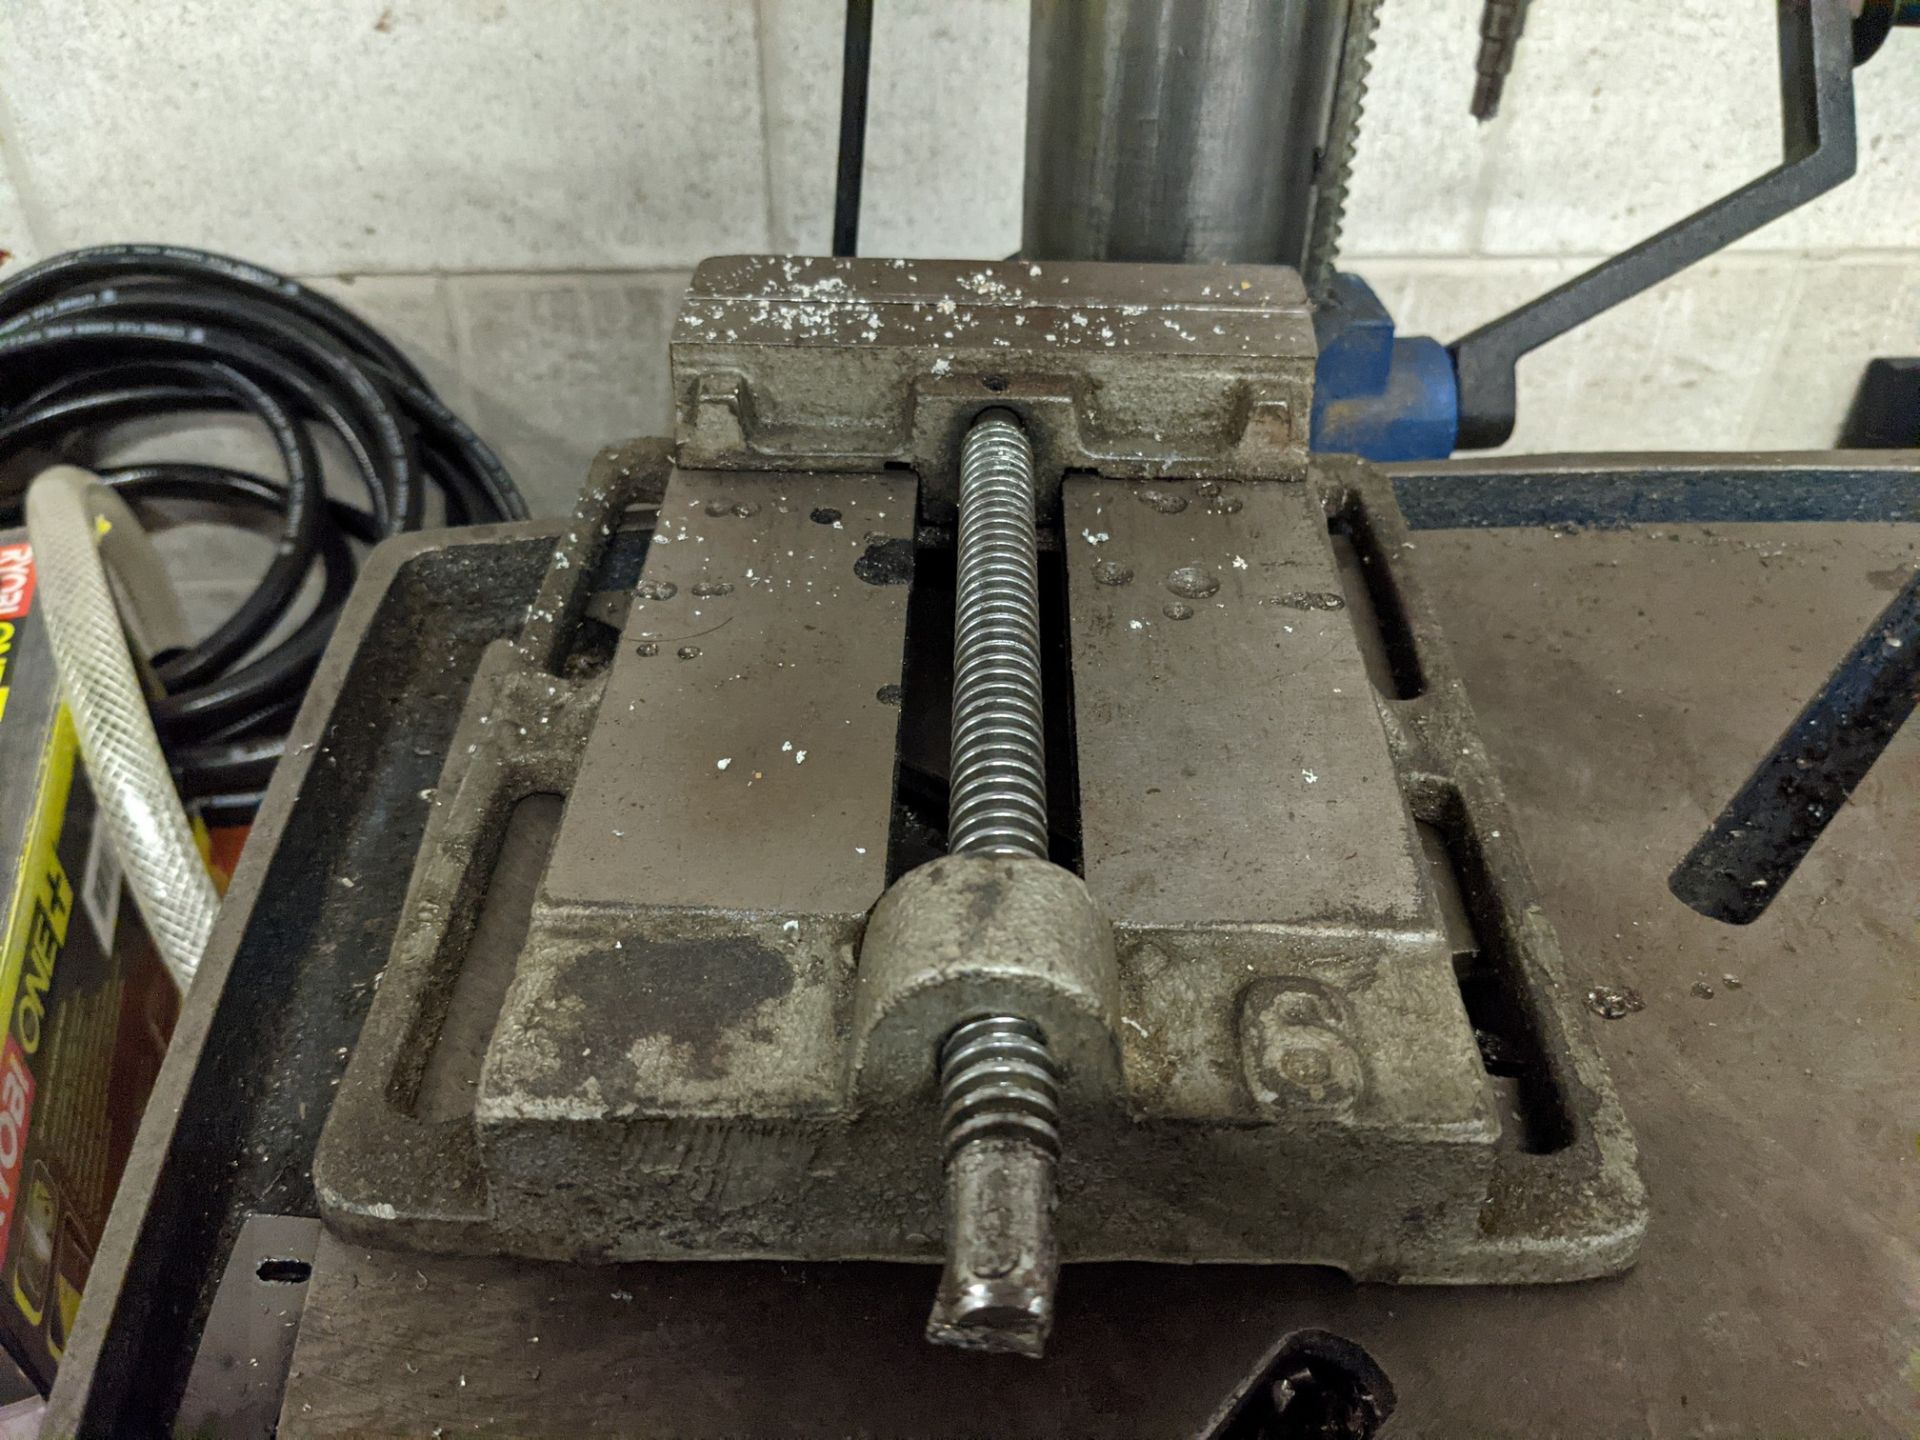 POWERFIST 1-1/2" VARIABLE SPEED DRILL PRESS - Image 4 of 4